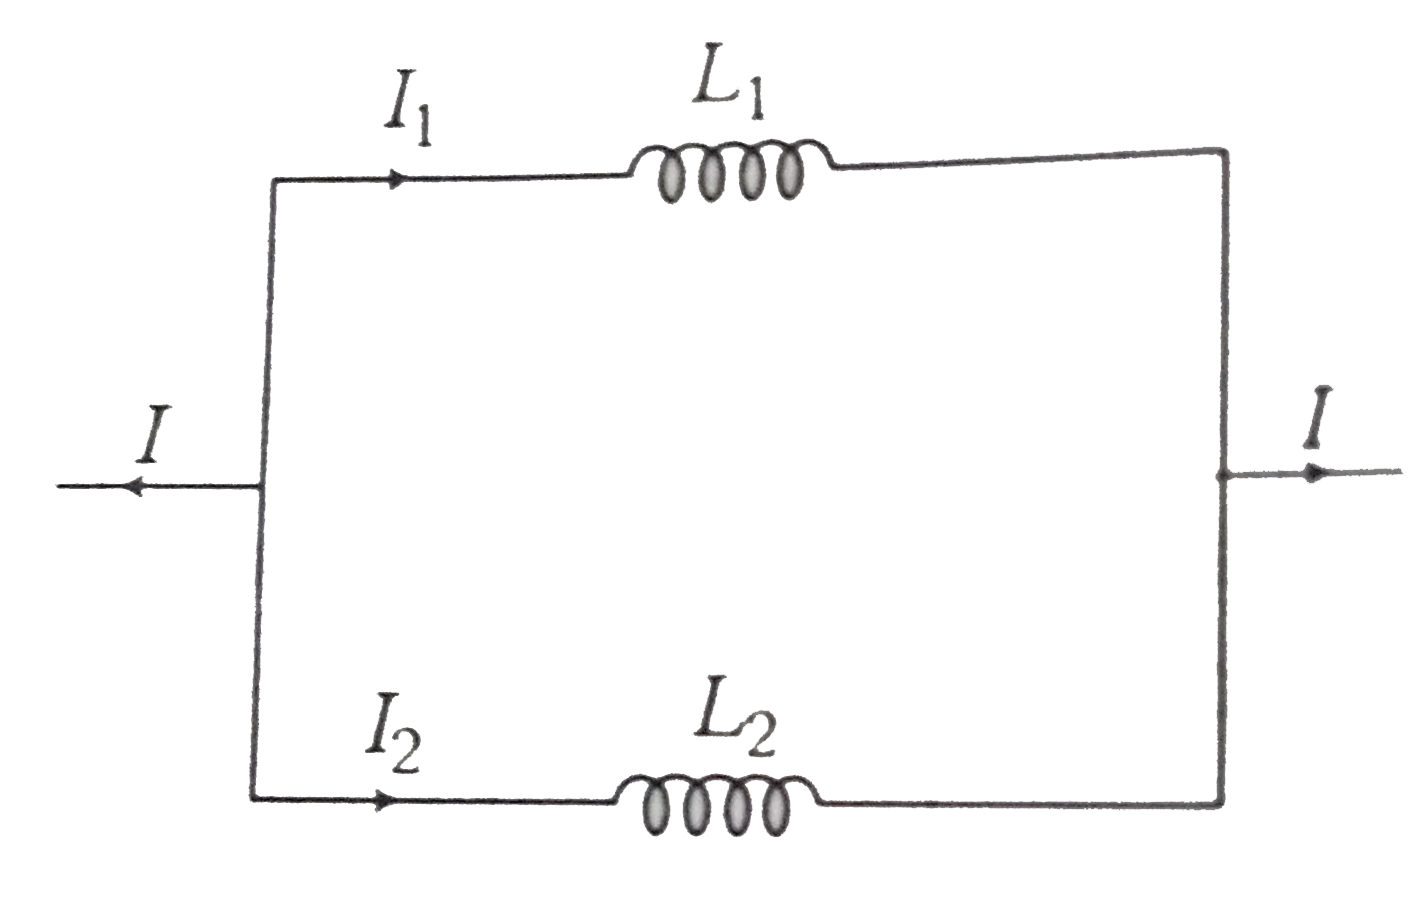 Two inductors  underset(1)(L) and  underset(2)(L)  are connected in parallel and a time varying current flows as shown in figure. Then the ratio currents  underset(1)(l)  / underset(2)(l)  at any time t is